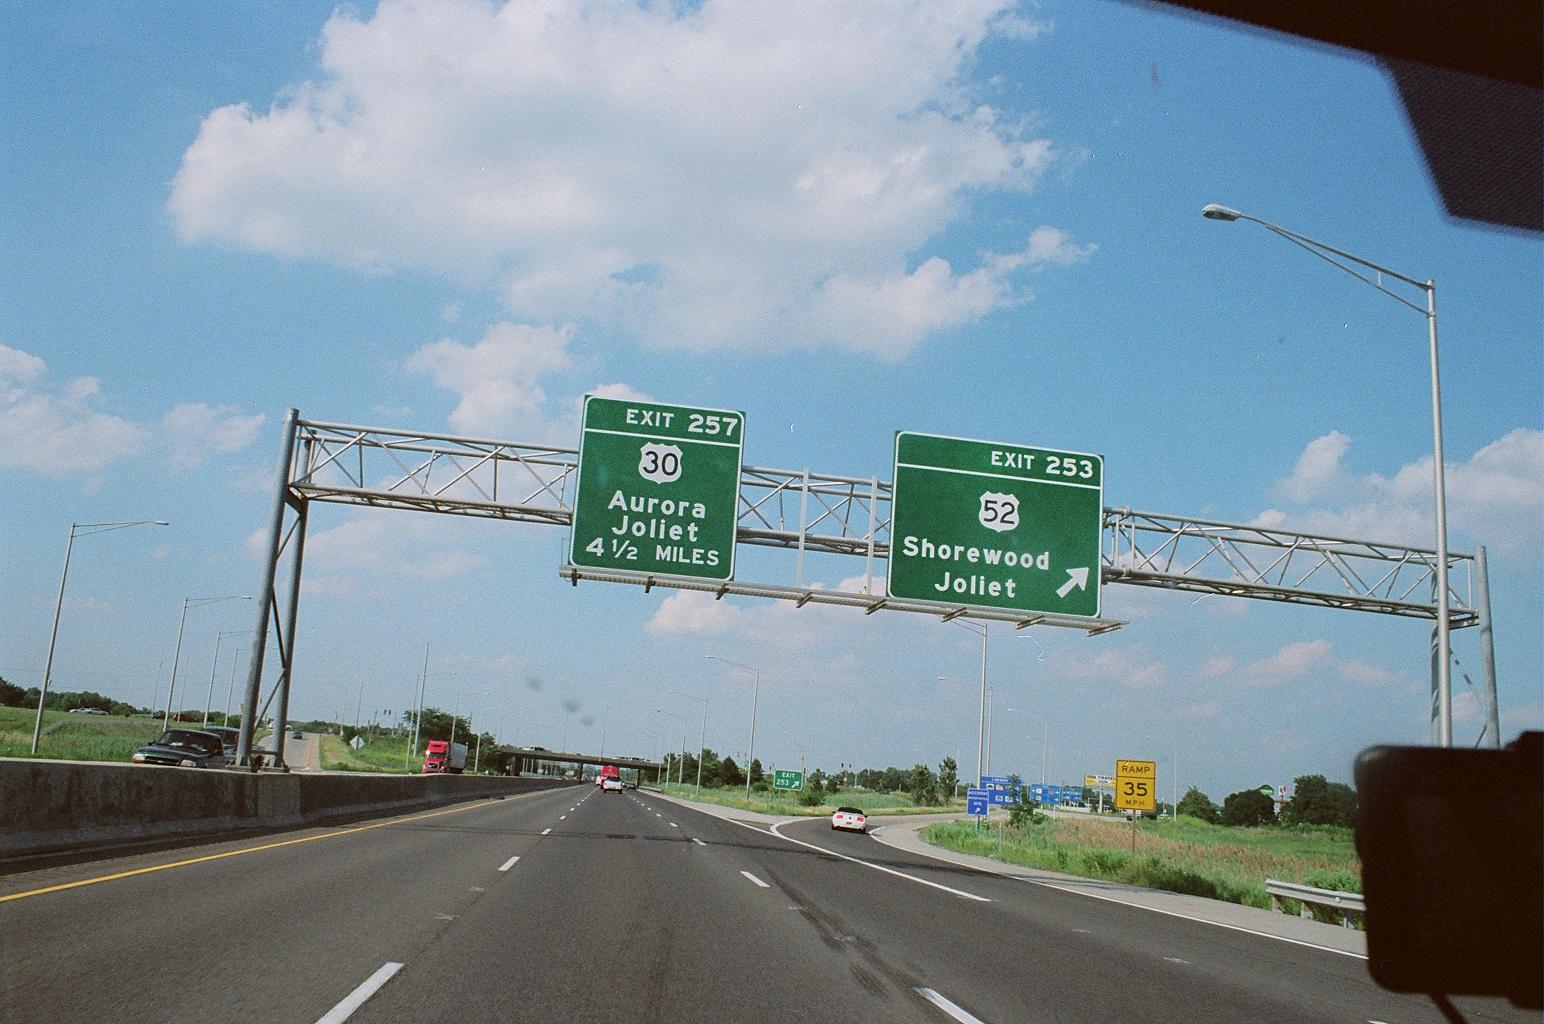 Photo of a highway sign for Shorewood Illinois for an article listing facts and history about the town.